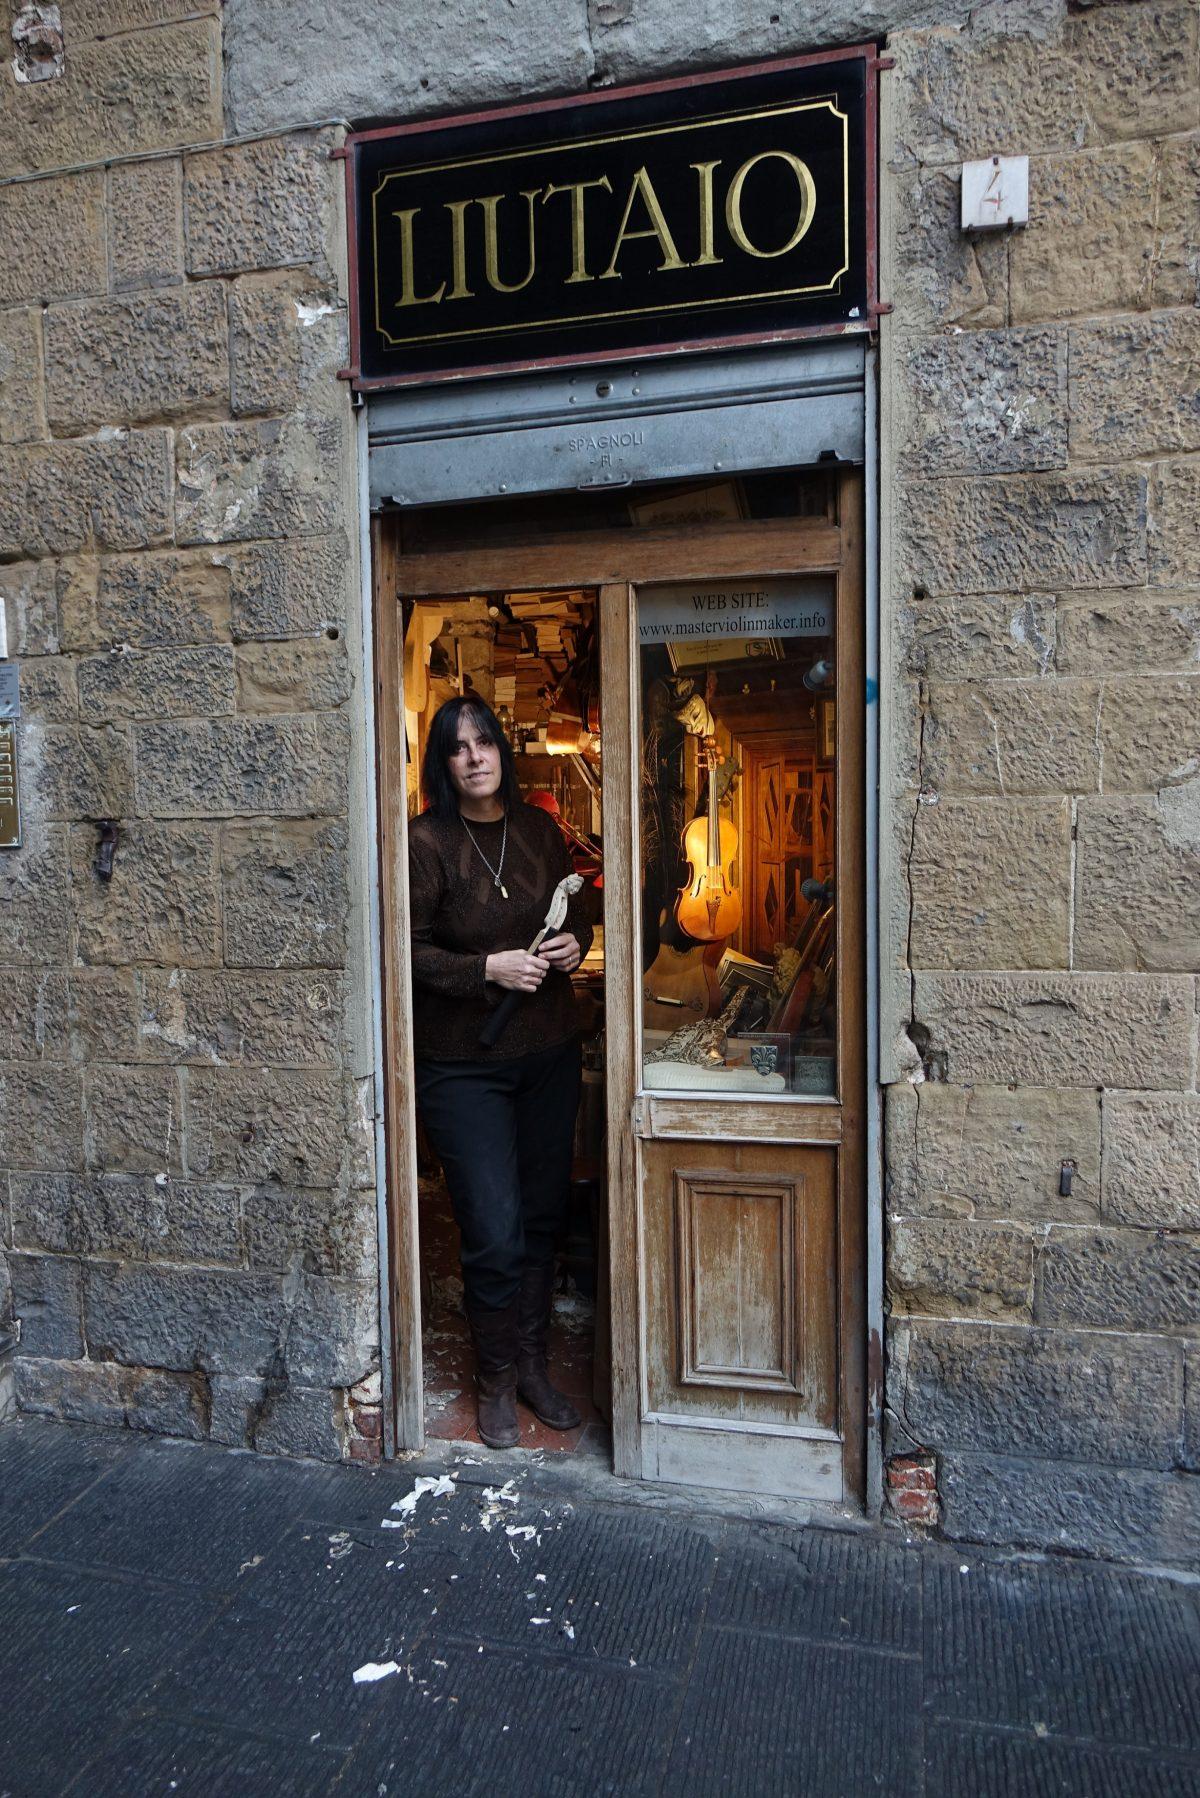 Master violin-maker and restorer of fine stringed instruments Jamie Lazzara in the doorway of her workshop in Florence on Oct. 30, 2018. (Paolo Boni)